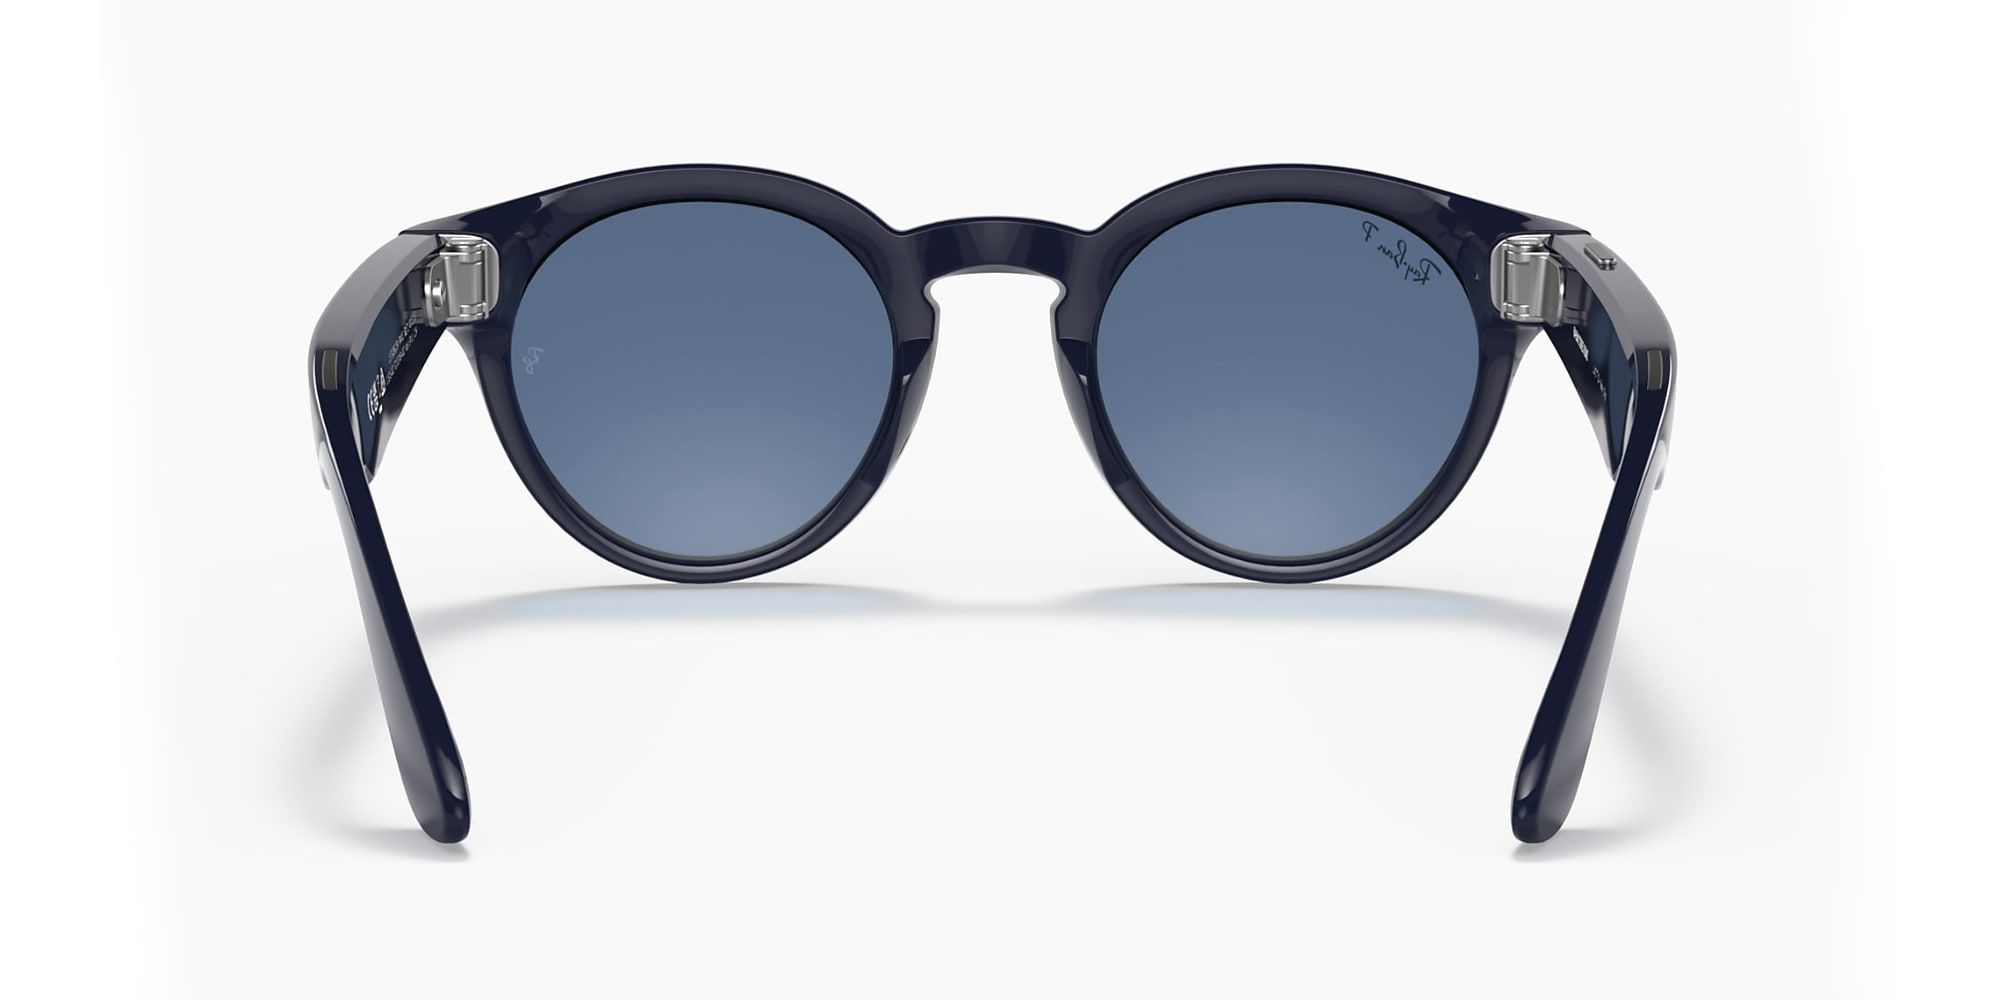 Facebook Ray-Ban Stories From Behind